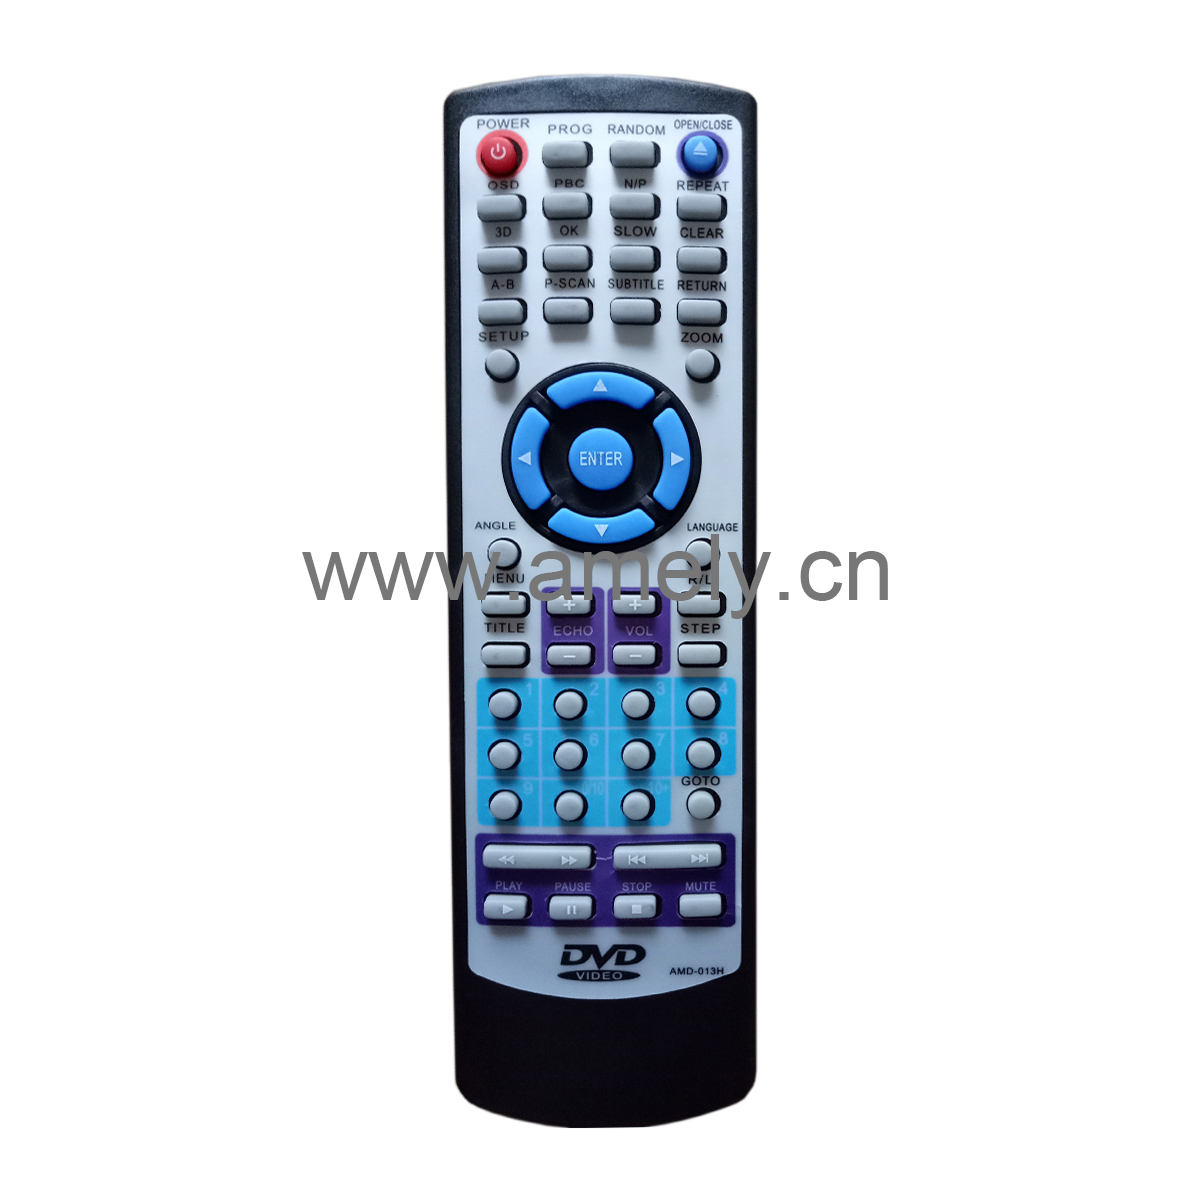 US$ 1.40 - AMD-013A / Use for DVD remote control - China Amely